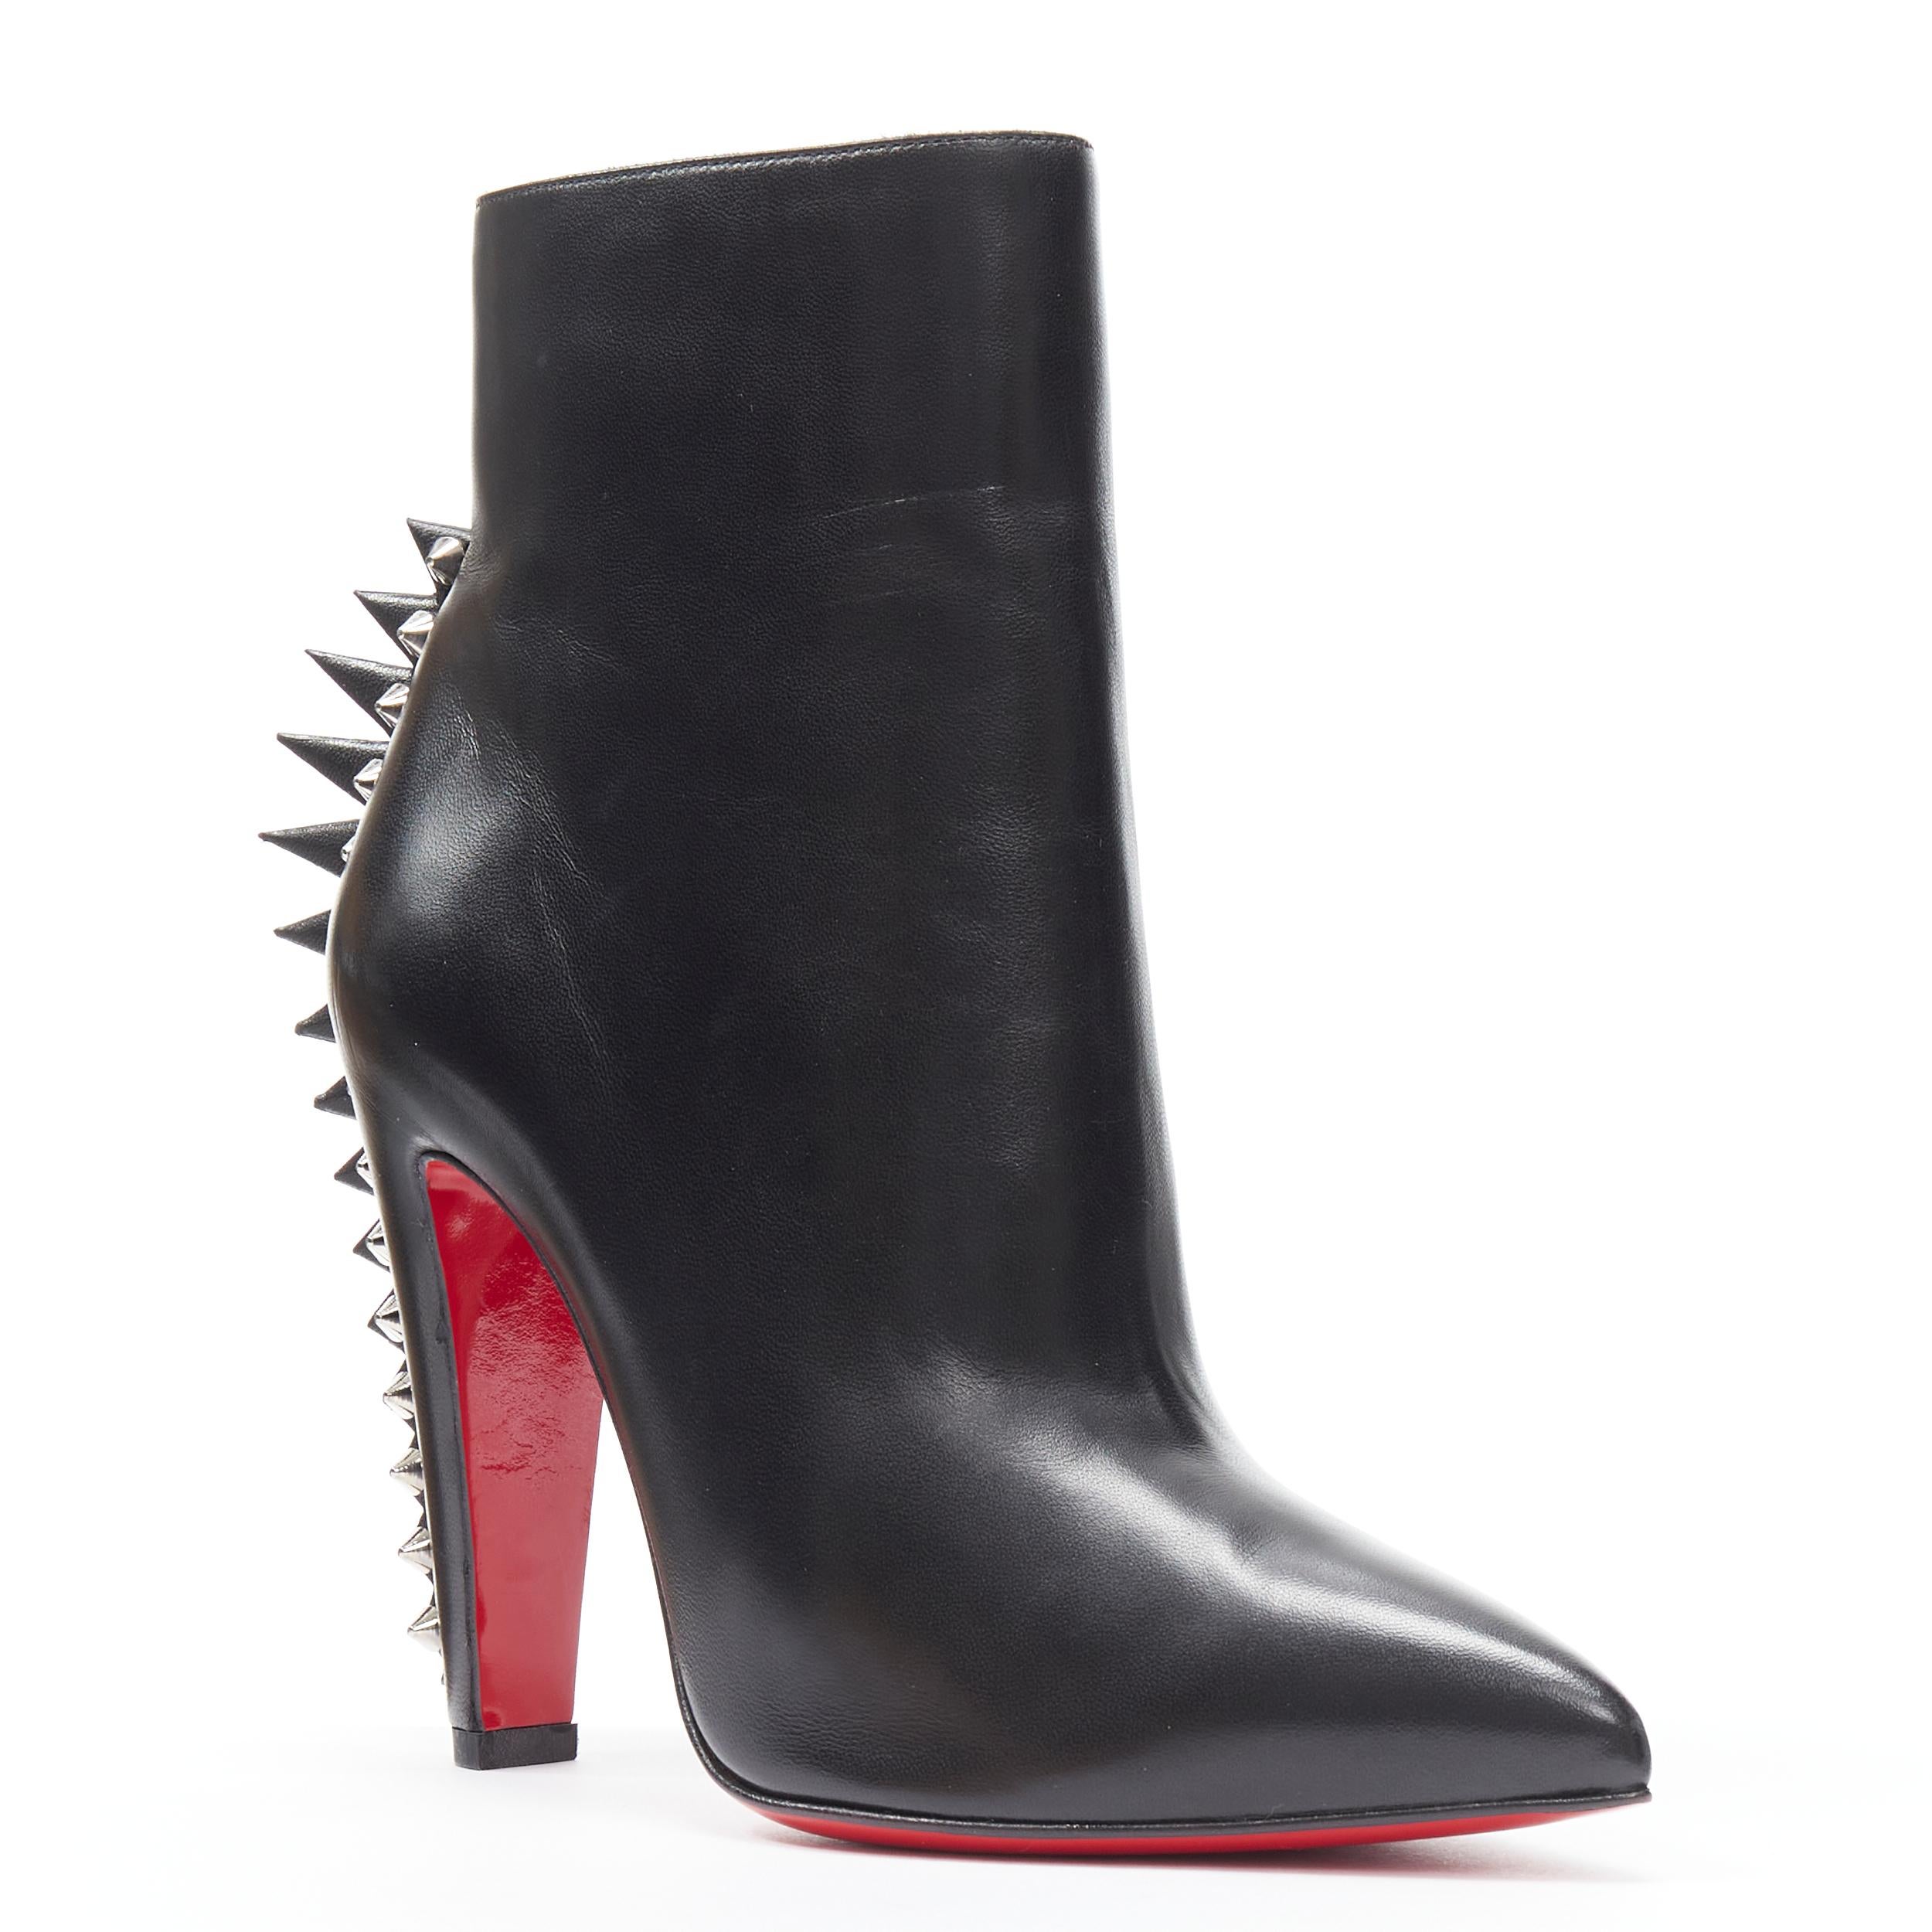 new CHRISTIAN LOUBOUTIN Electroboot 100 black spike punk mohawk boot EU37.5 Reference: TGAS/B01269 
Brand: Christian Louboutin 
Designer: Christian Louboutin 
Material: Leather 
Color: Black 
Pattern: Solid 
Closure: Zip 
Extra Detail: Electroboot